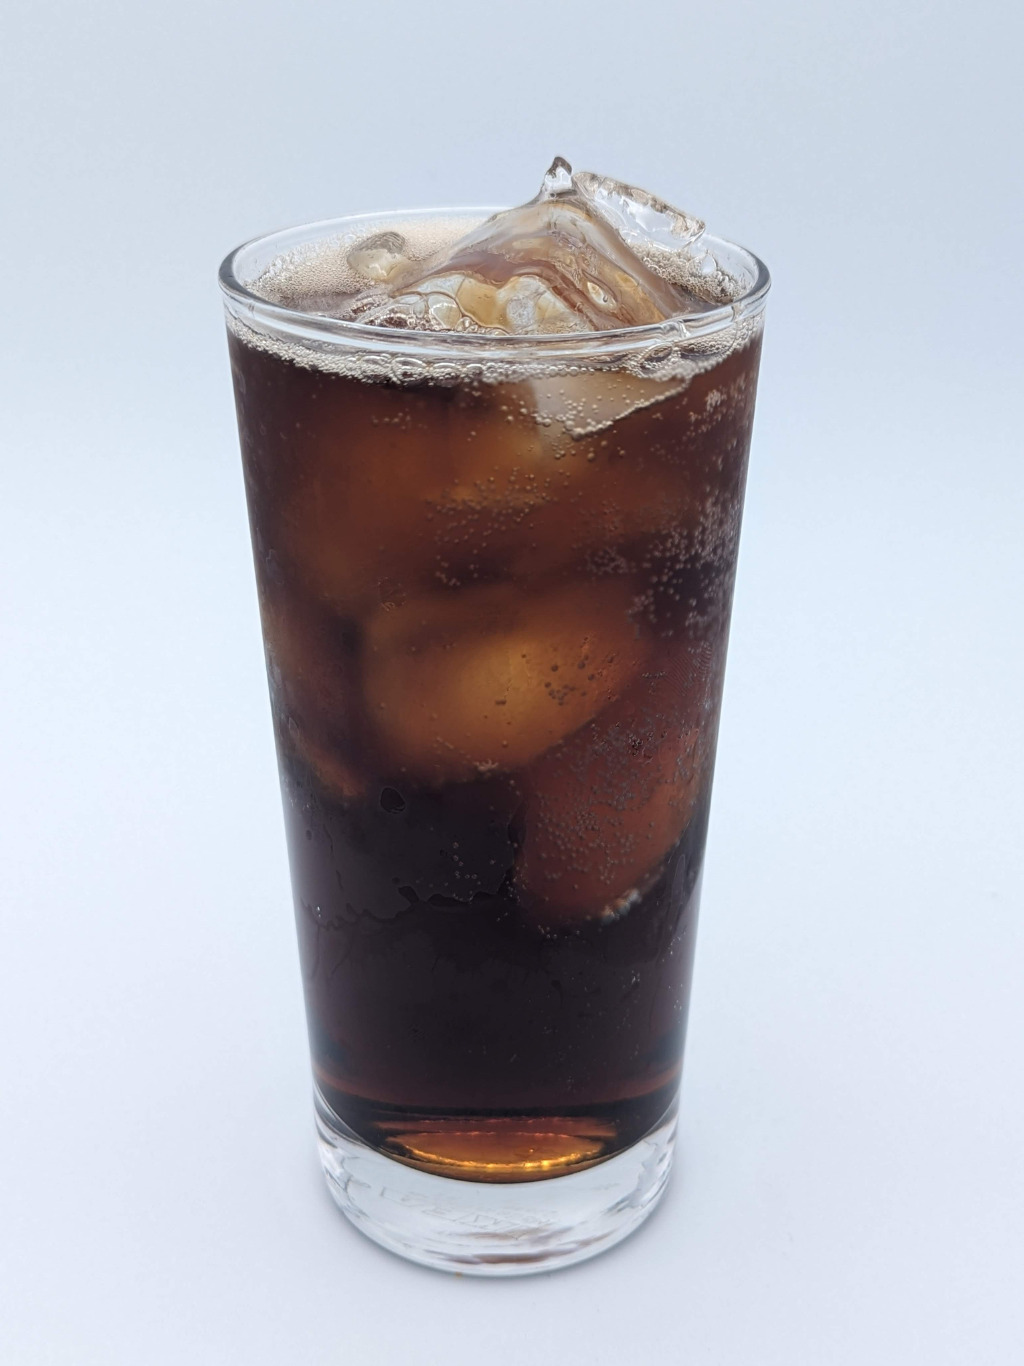 dark brown liquid in a tall glass filled with ice